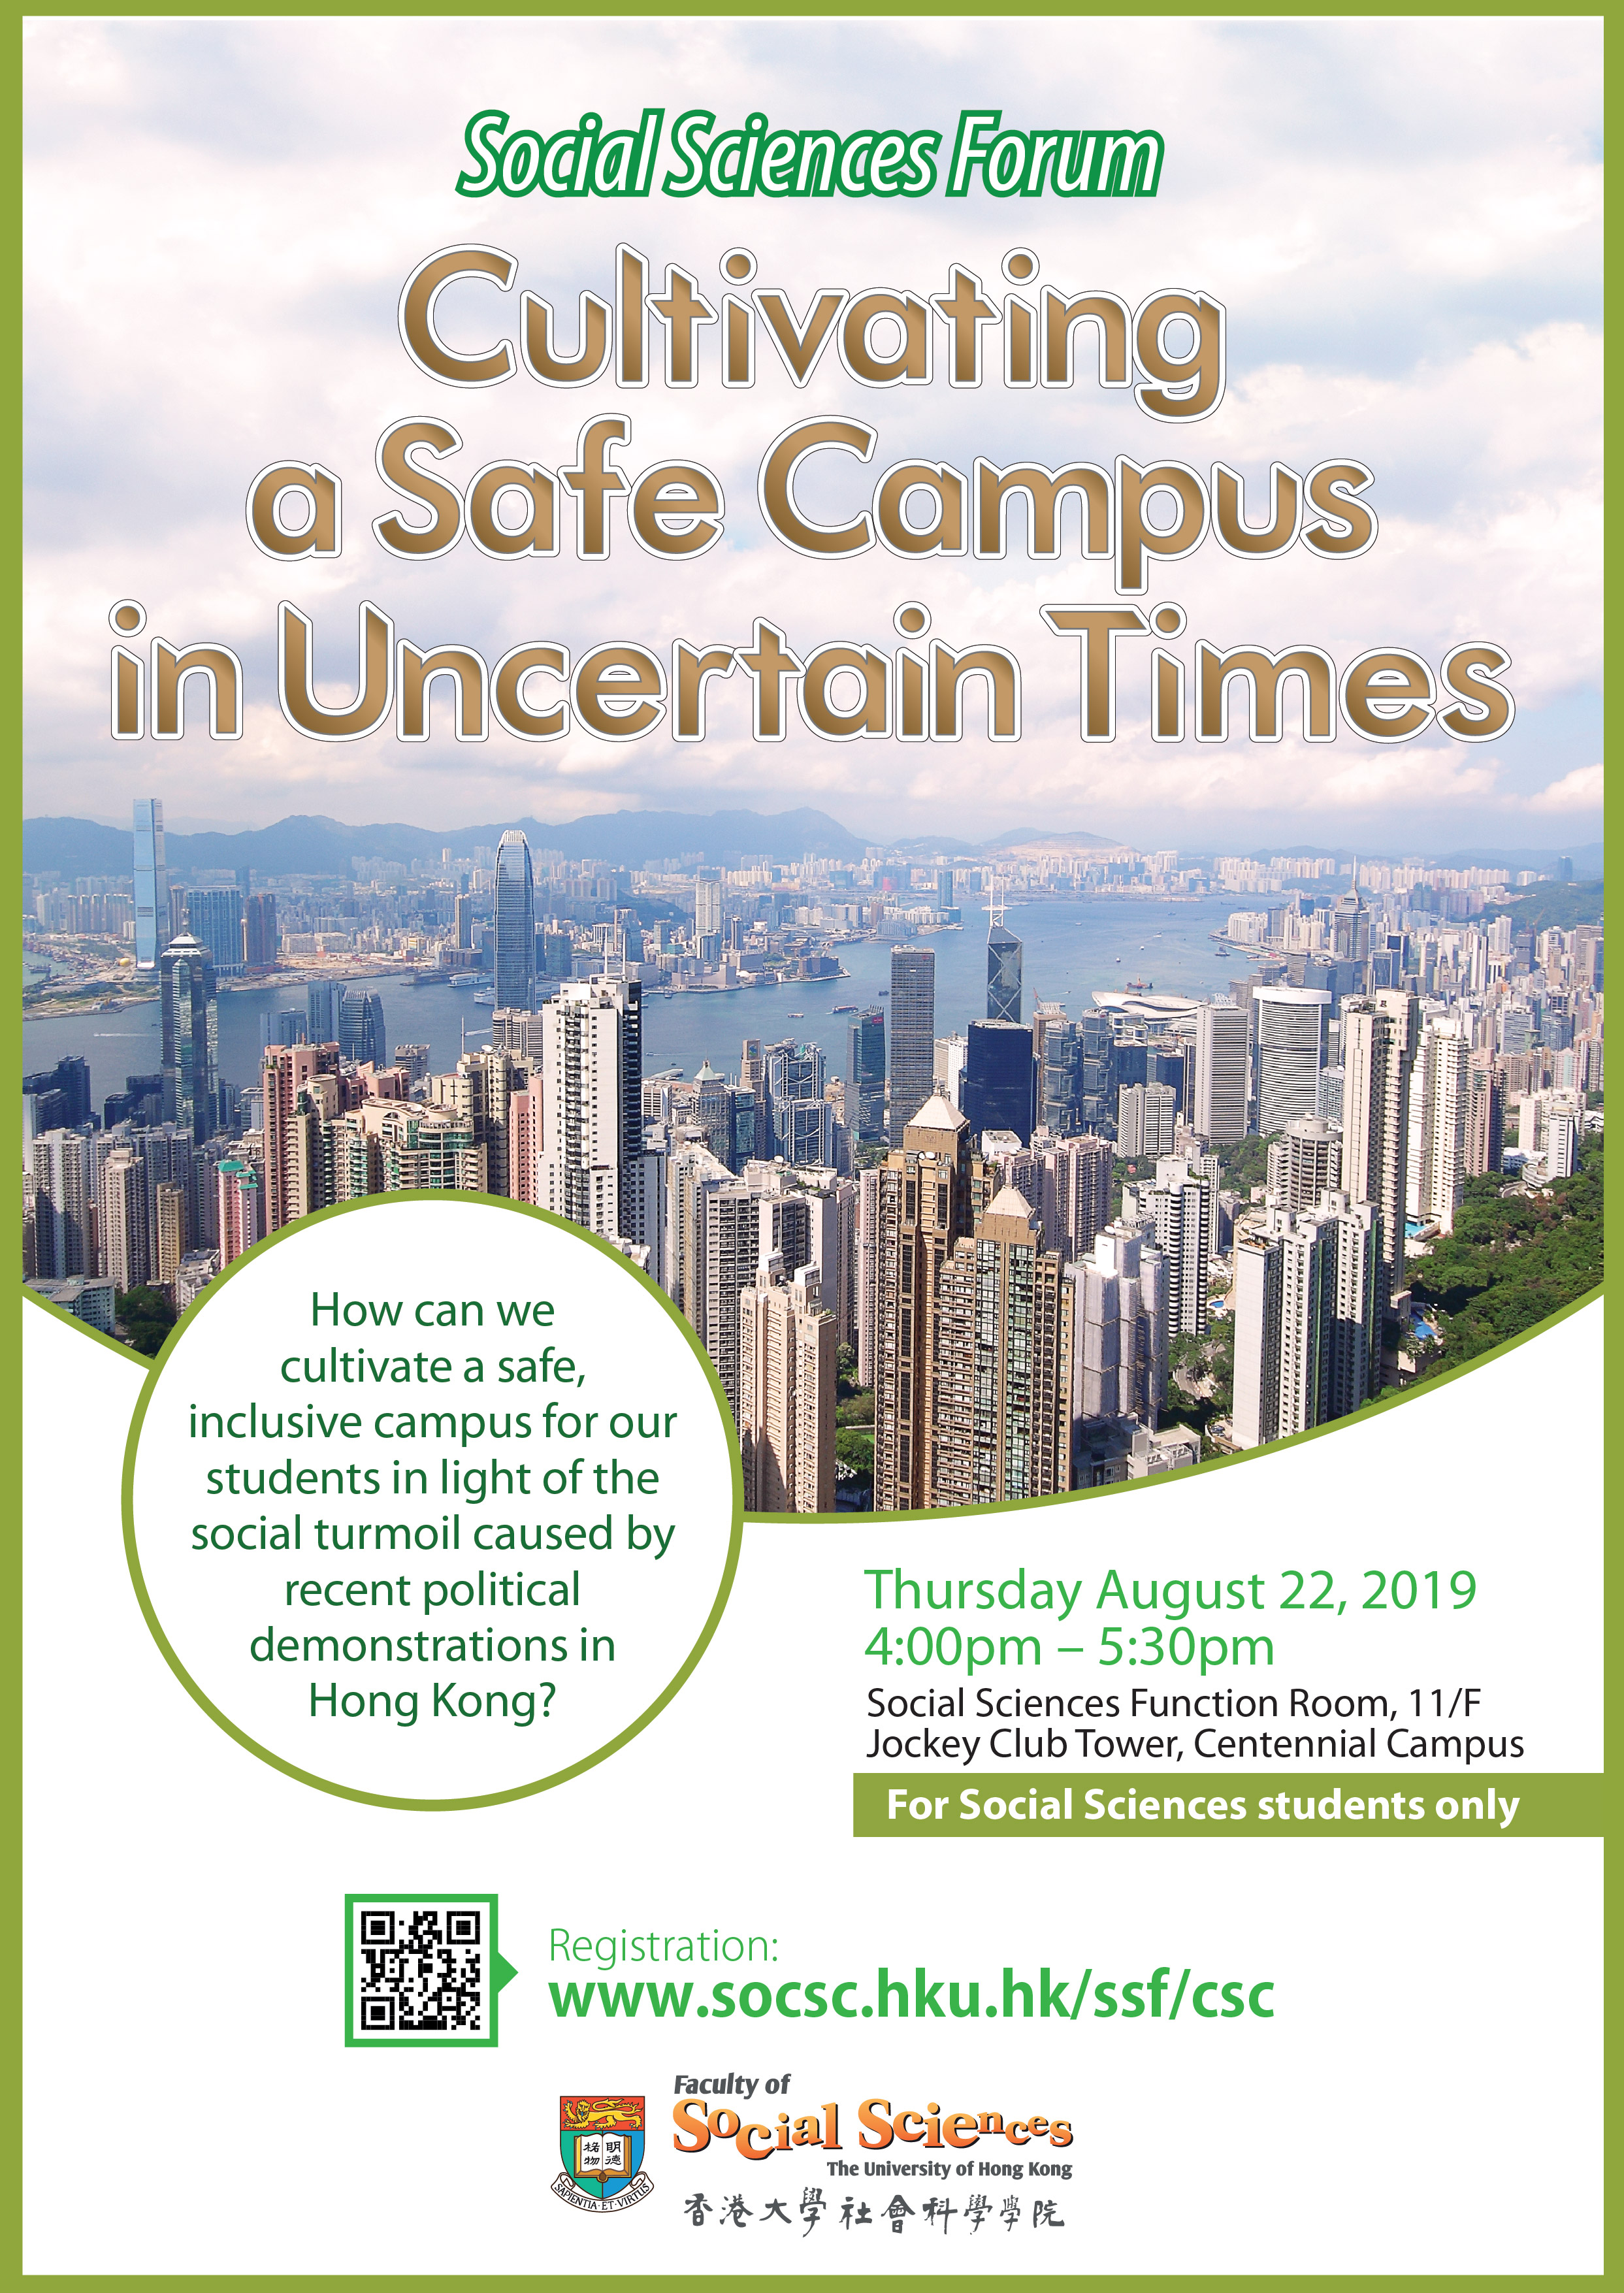 Social sciences forum - cultivating a safe campus in uncertain times